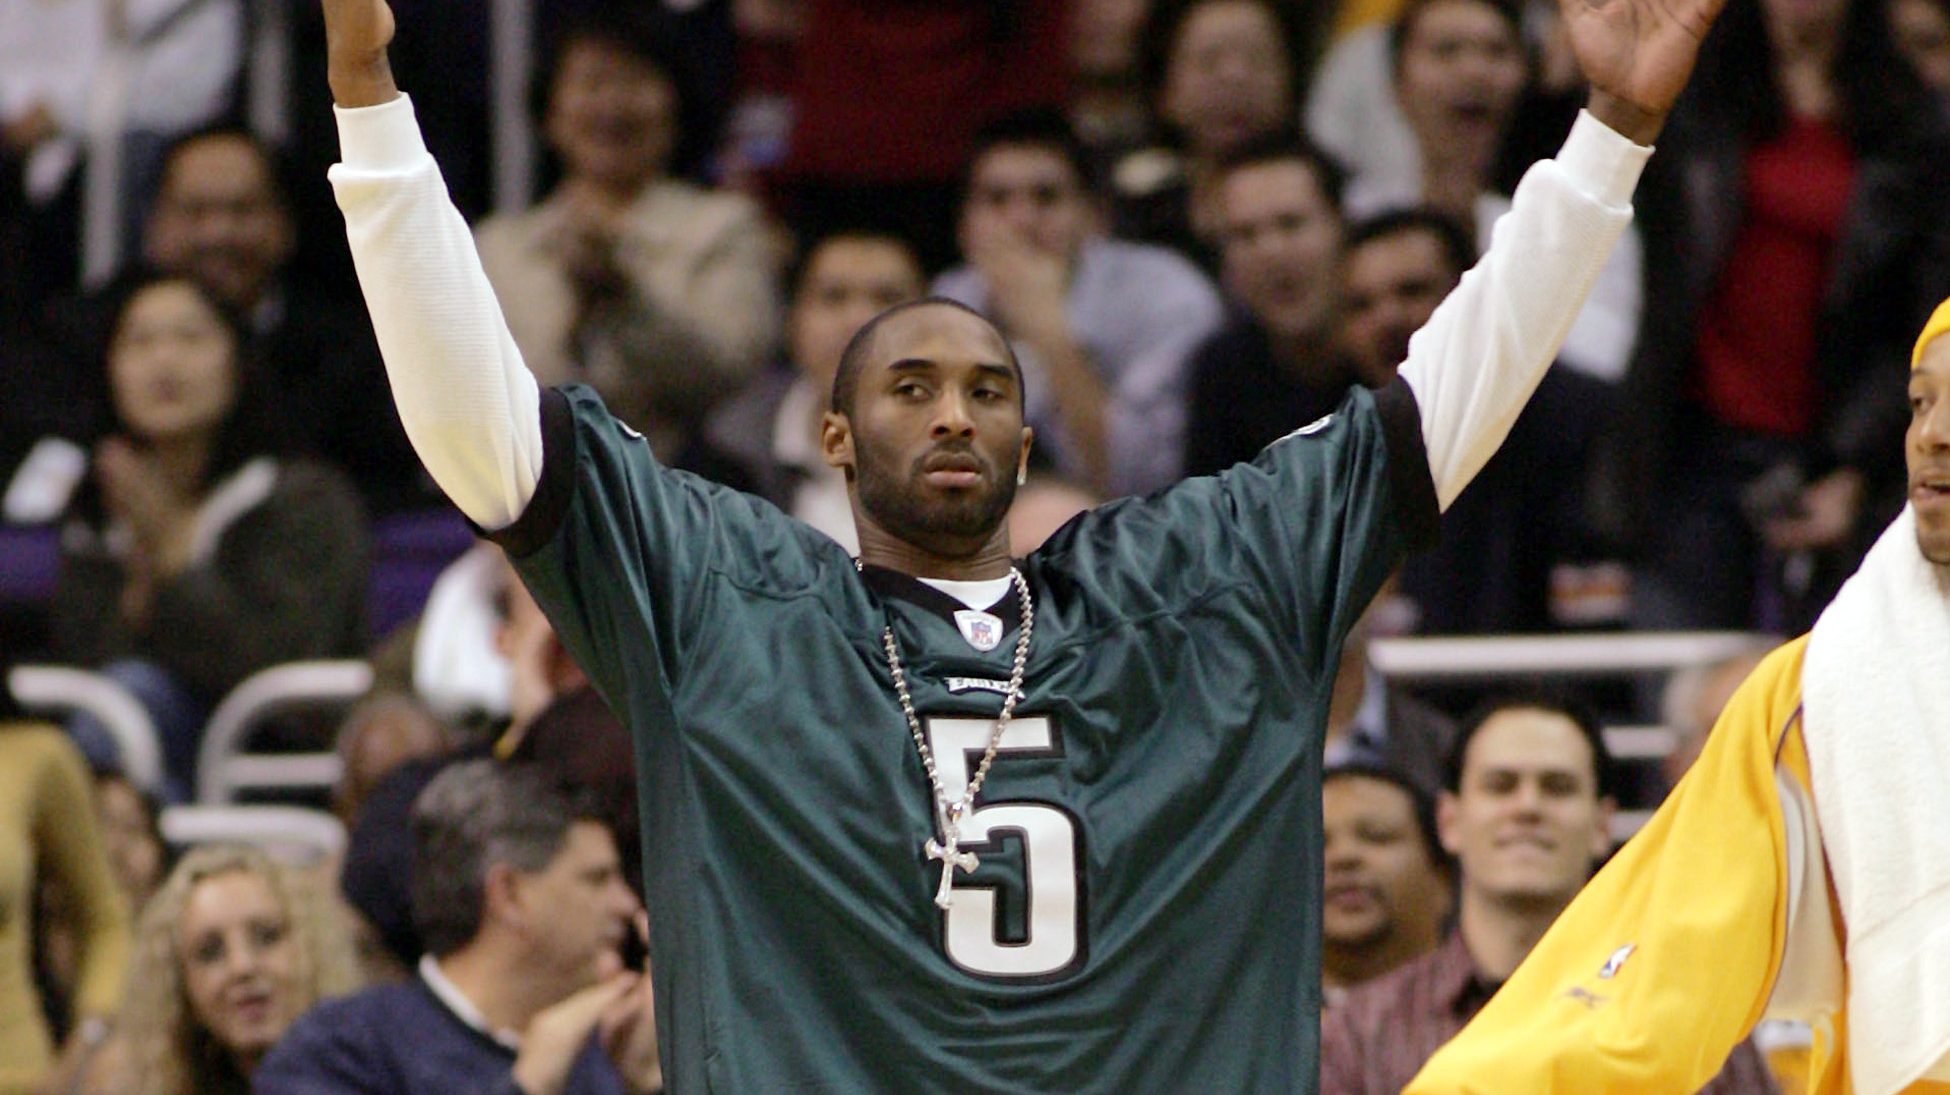 Remembering When Kobe Bryant Taught Super Bowl Eagles the Mamba